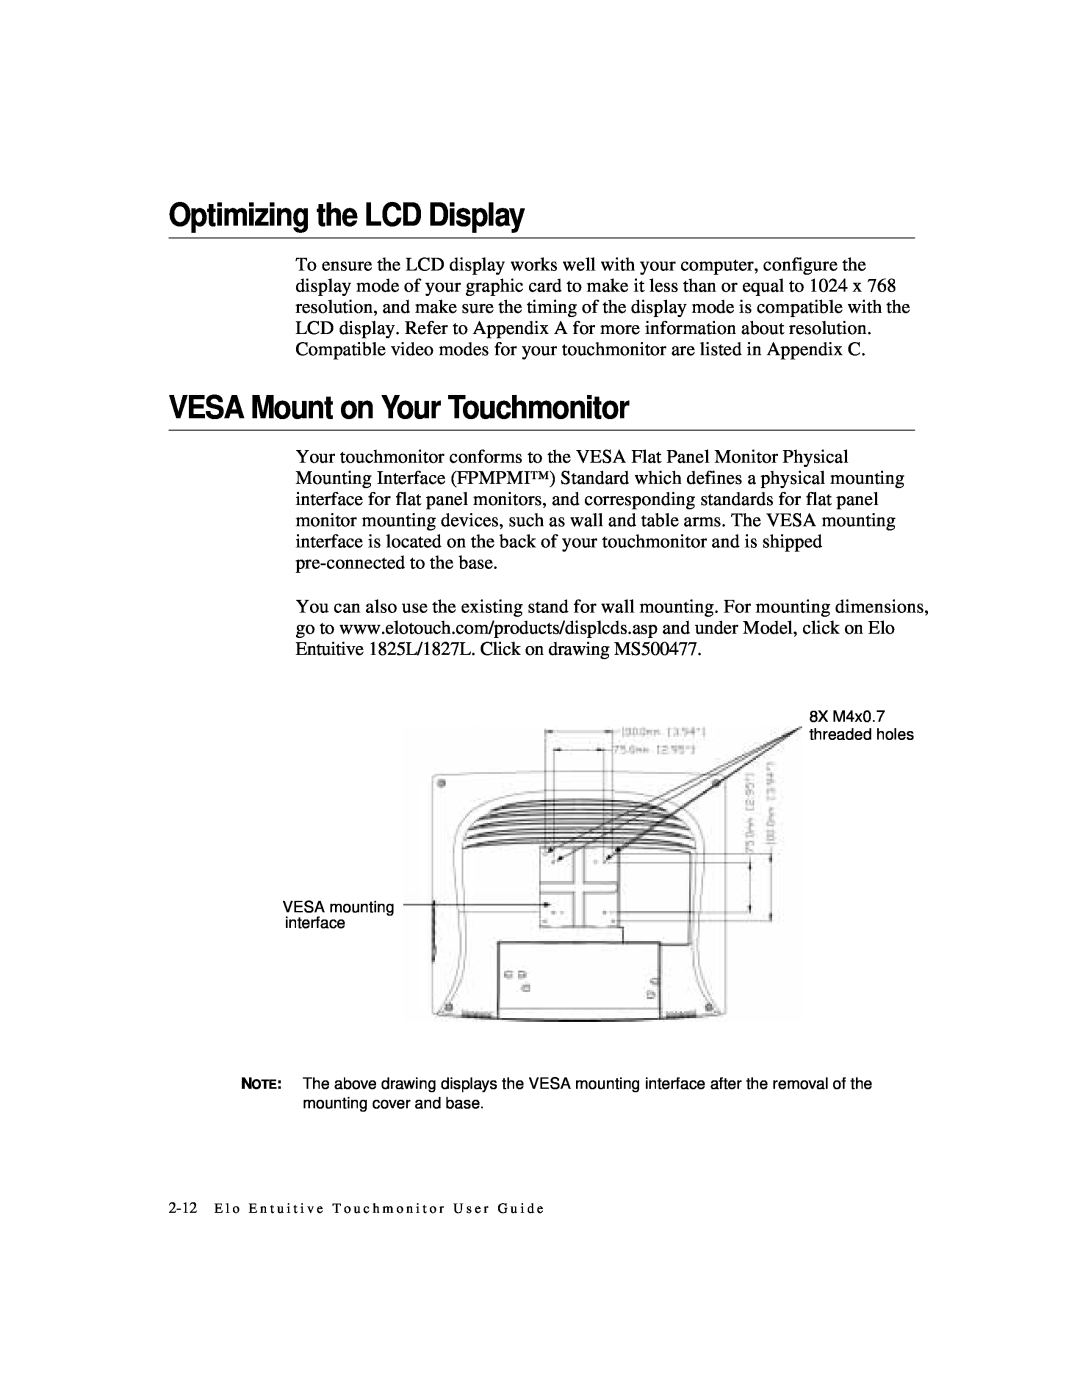 Elo TouchSystems 1825L, 1827L manual Optimizing the LCD Display, VESA Mount on Your Touchmonitor 